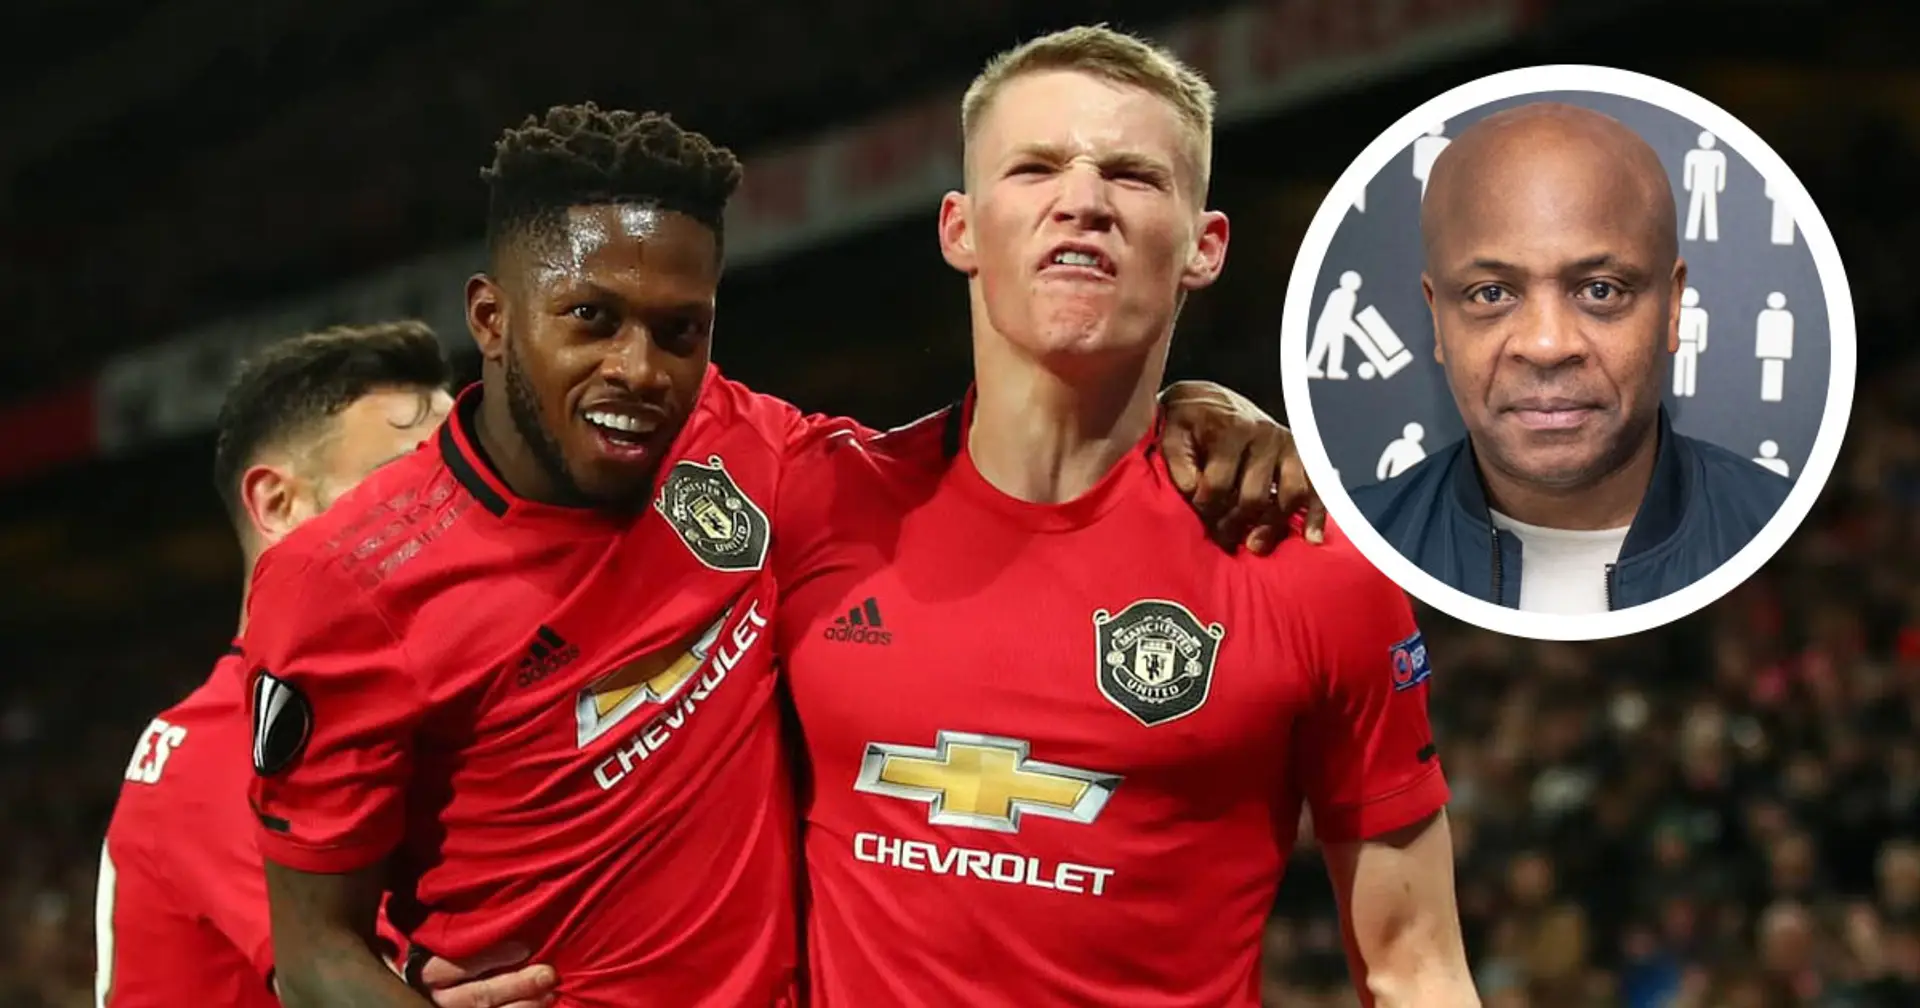 Paul Parker: 'Man United has a relegation standard midfield right now'